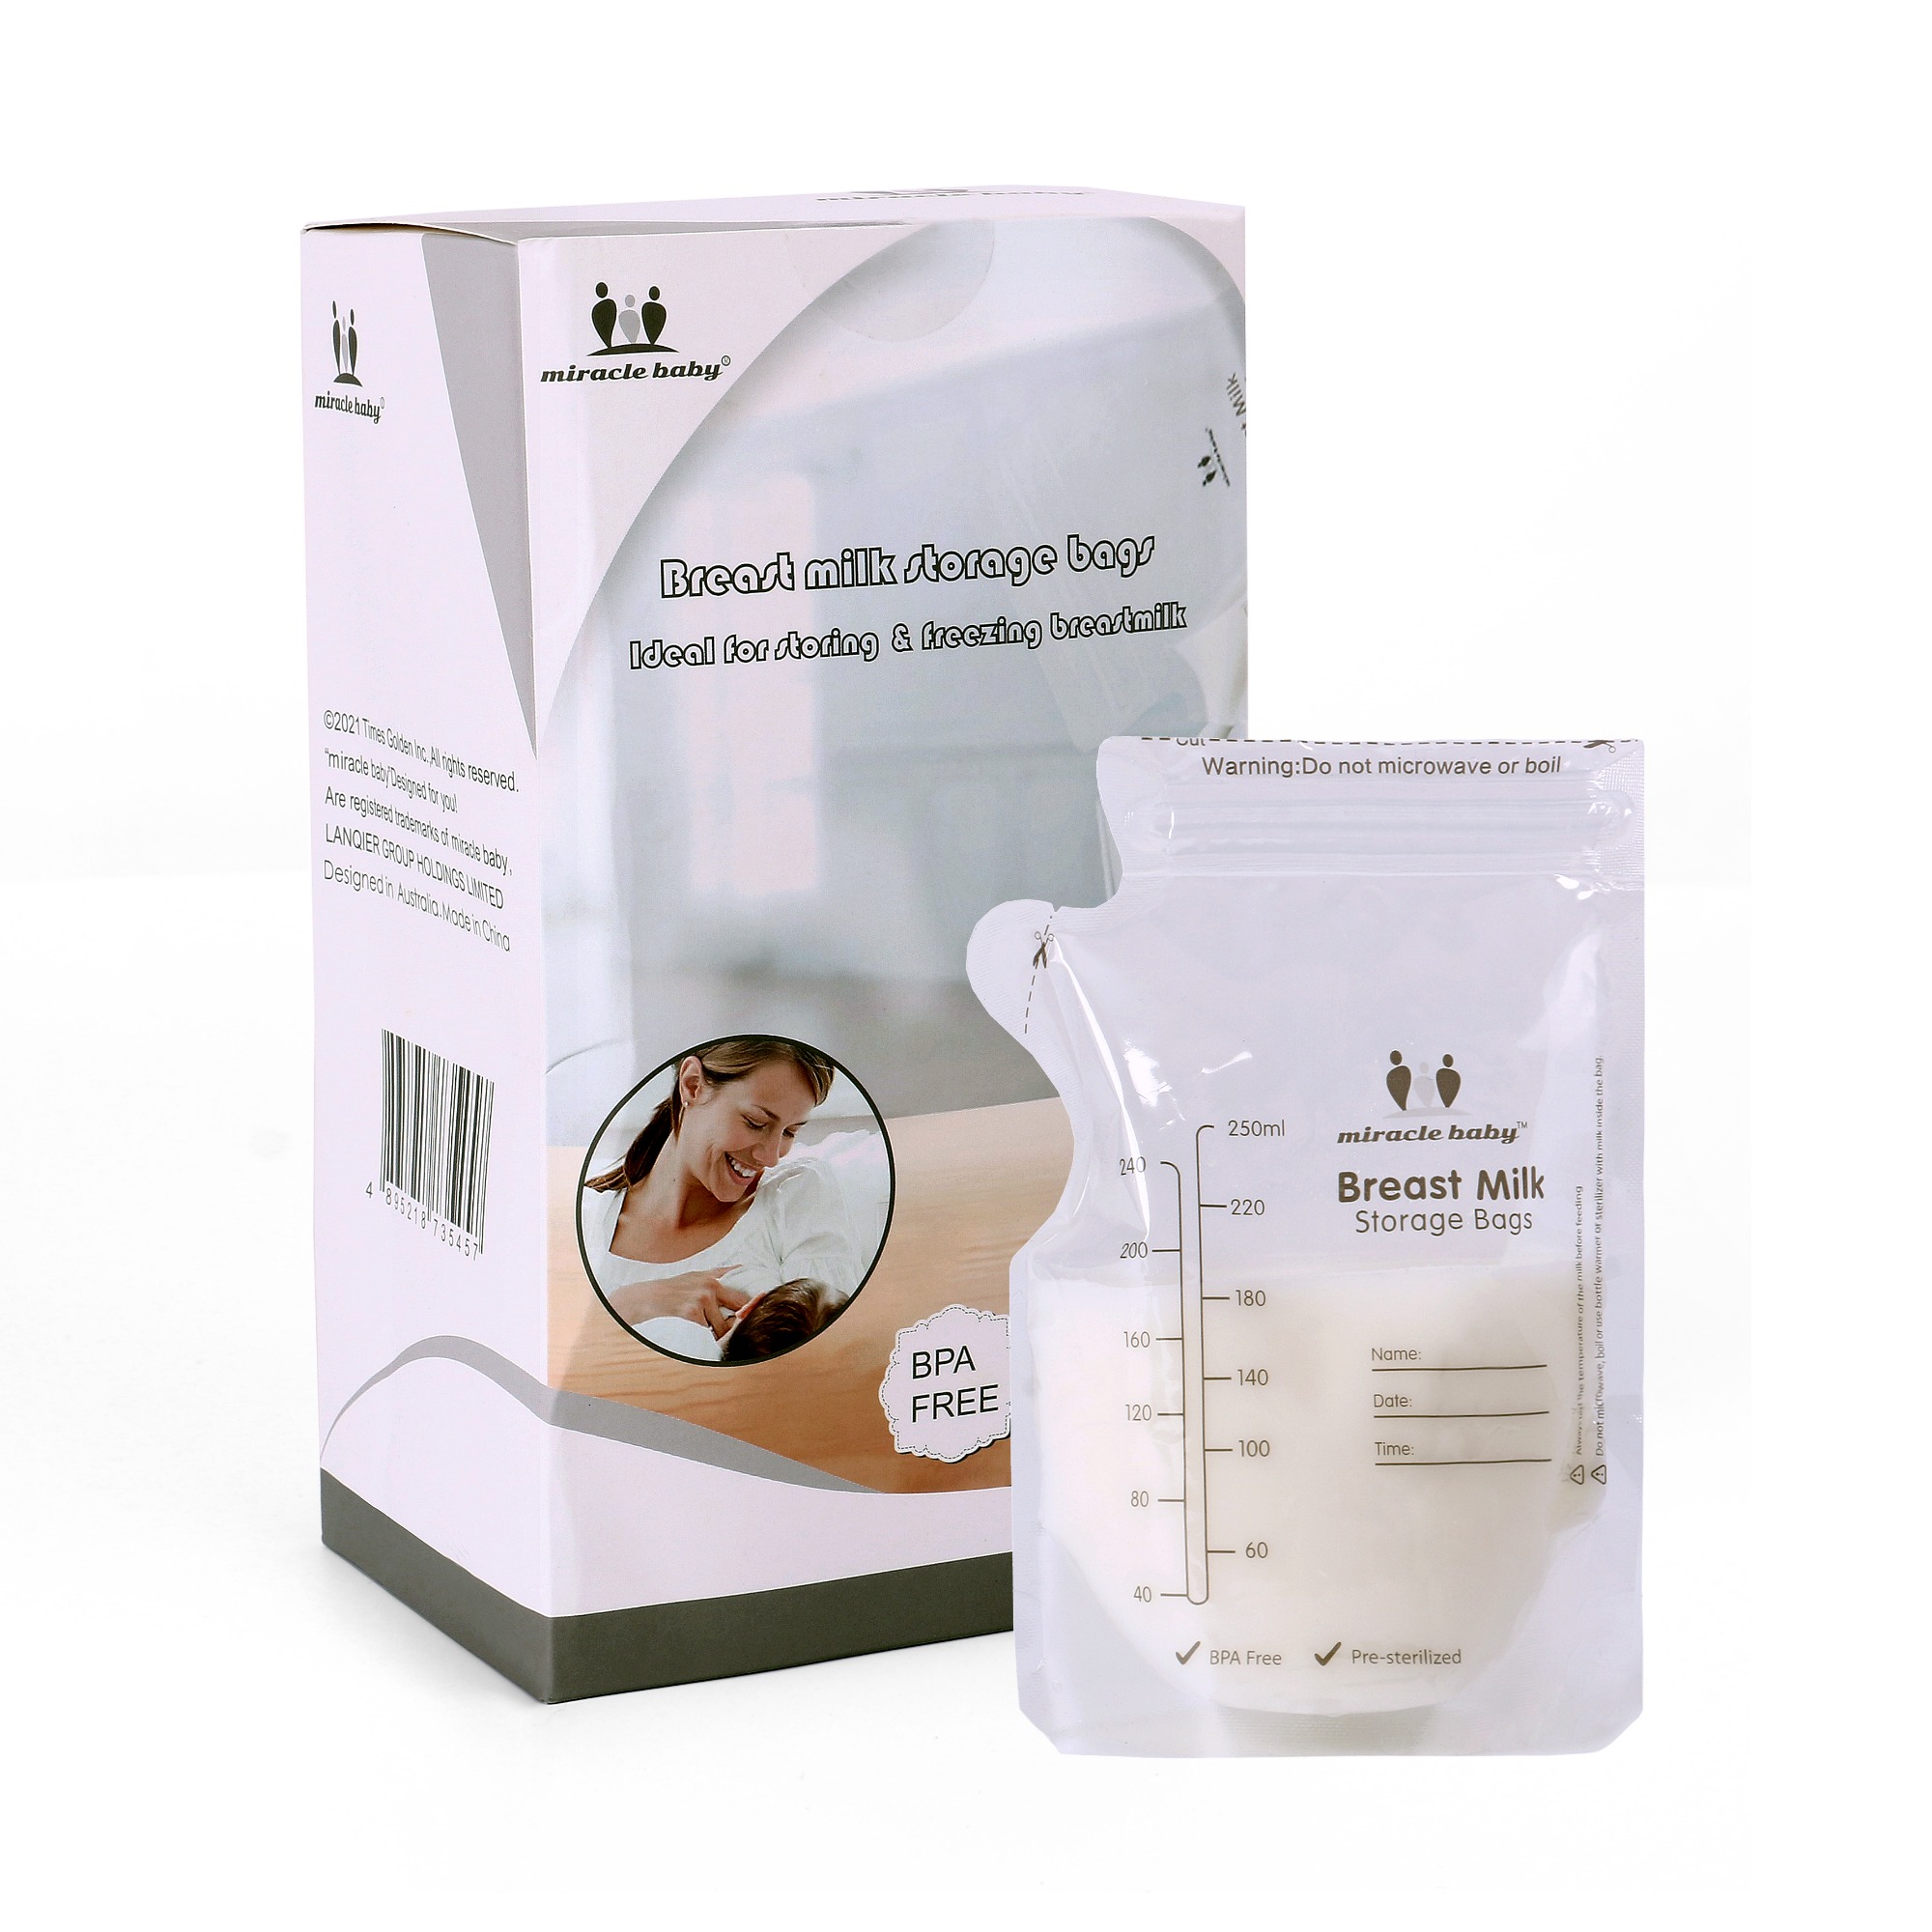 Breastmilk Storage Bags with Double Zipper Seal and Convenient